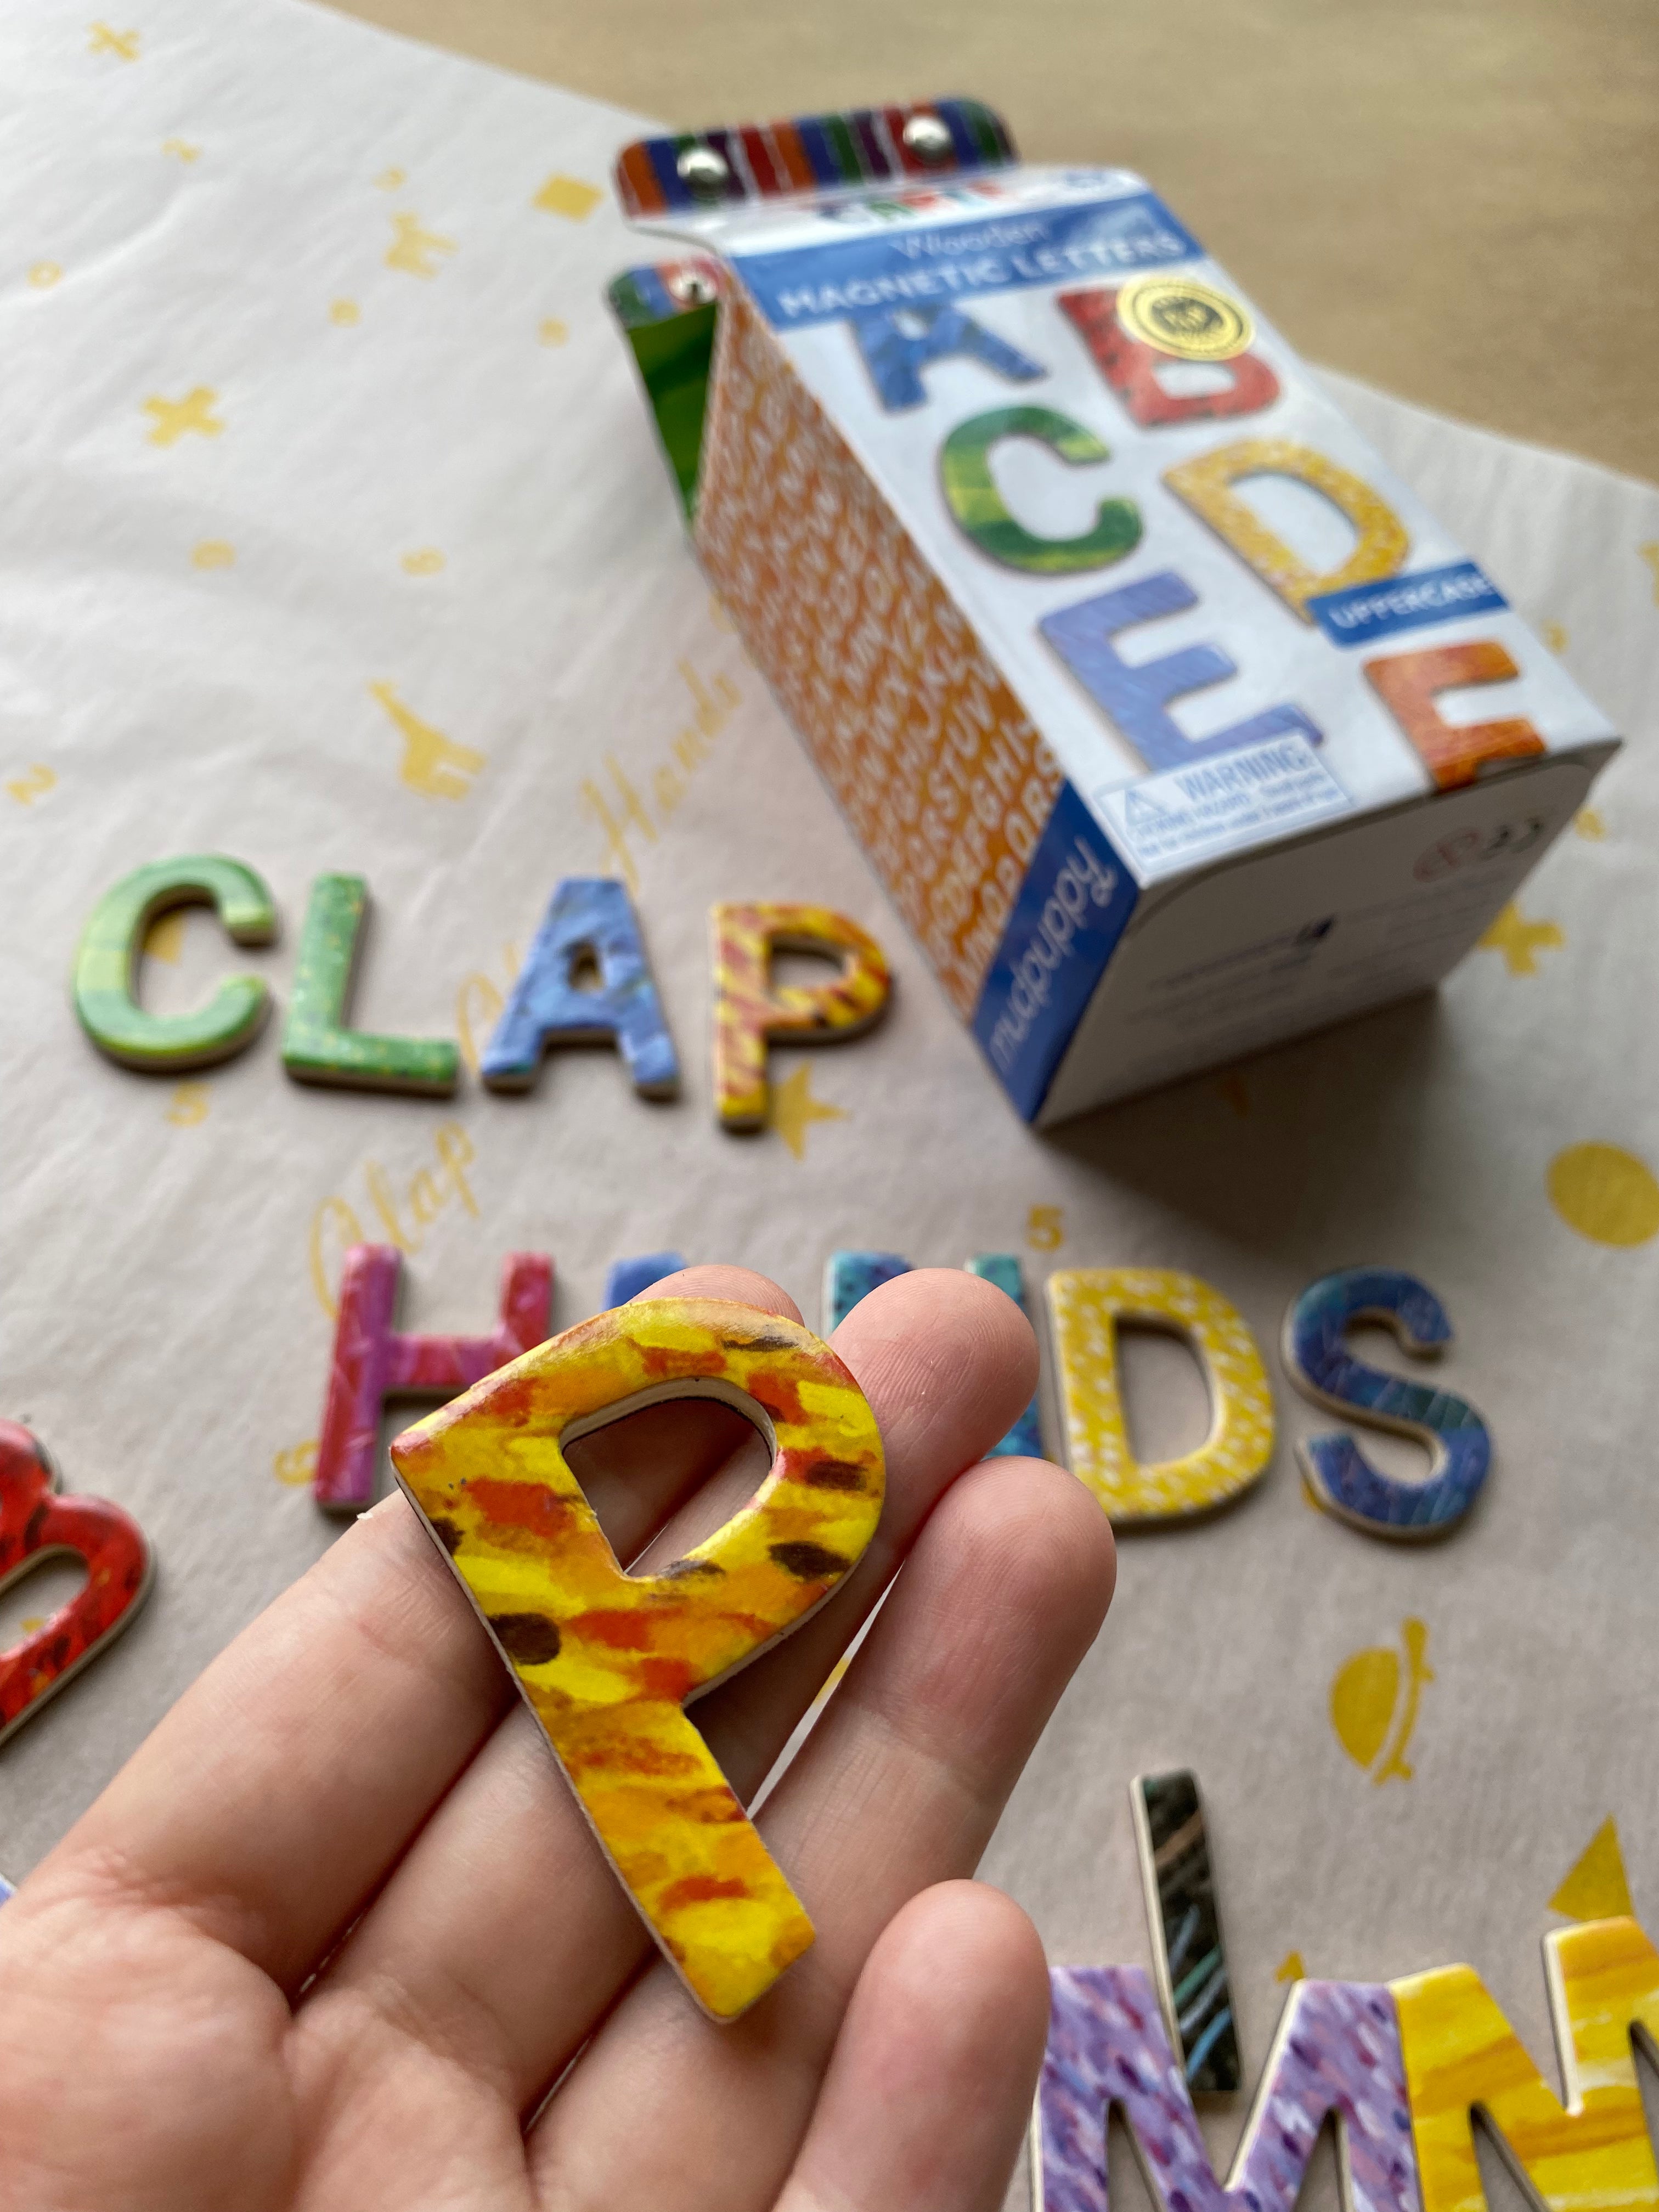 The world of Eric Carle: Wooden Magnetic Letters - Uppercase